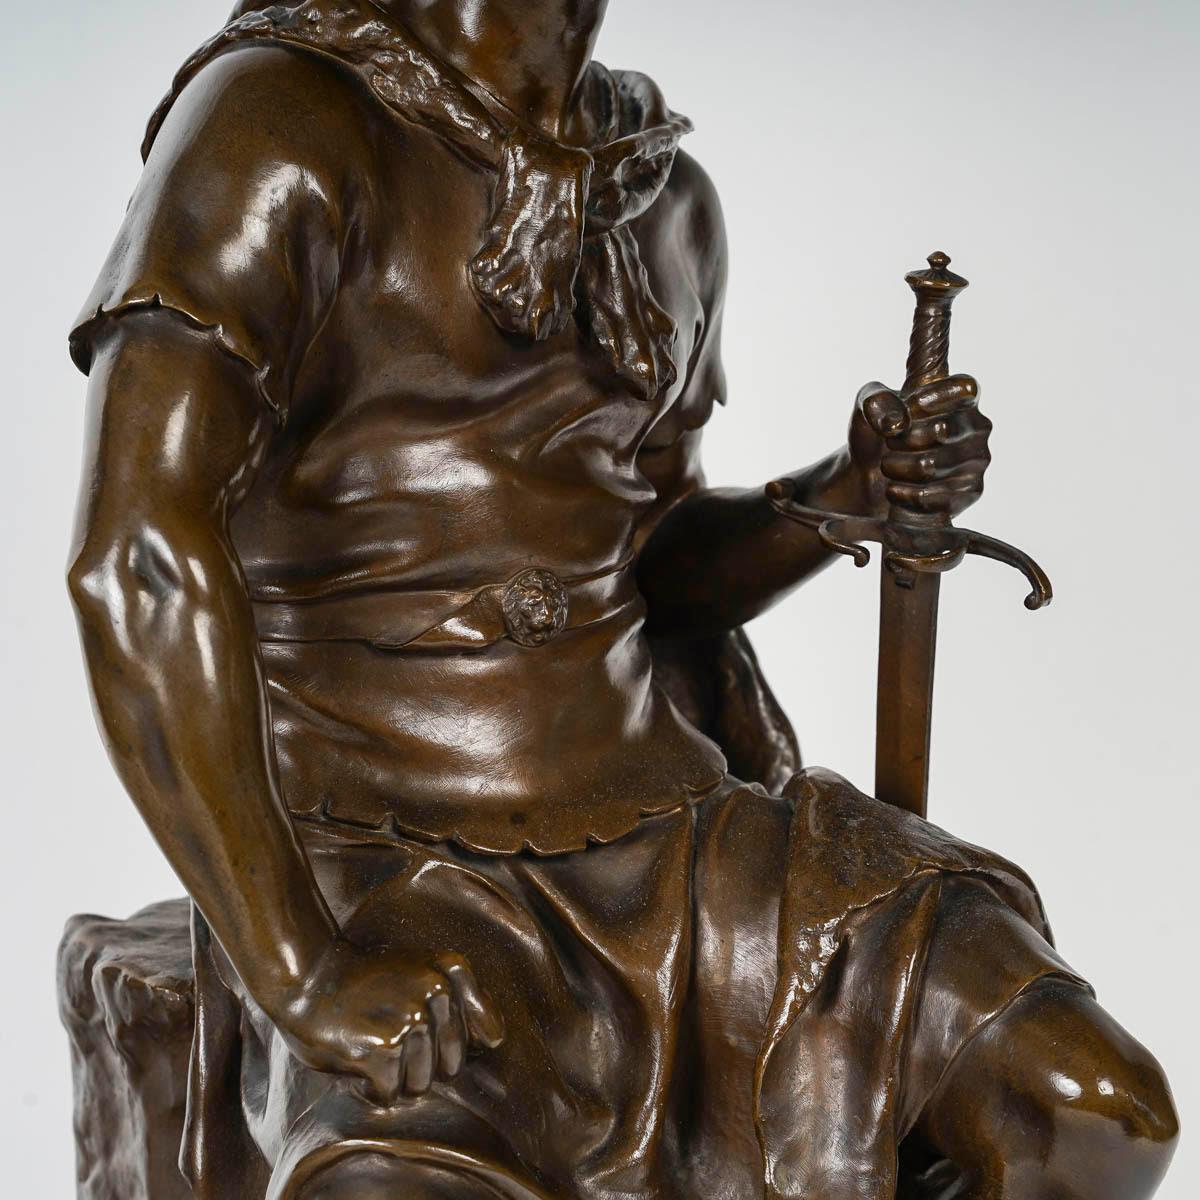 French Bronze, Sculpture by Paul Dubois, 19th Century, Napoleon III Period.